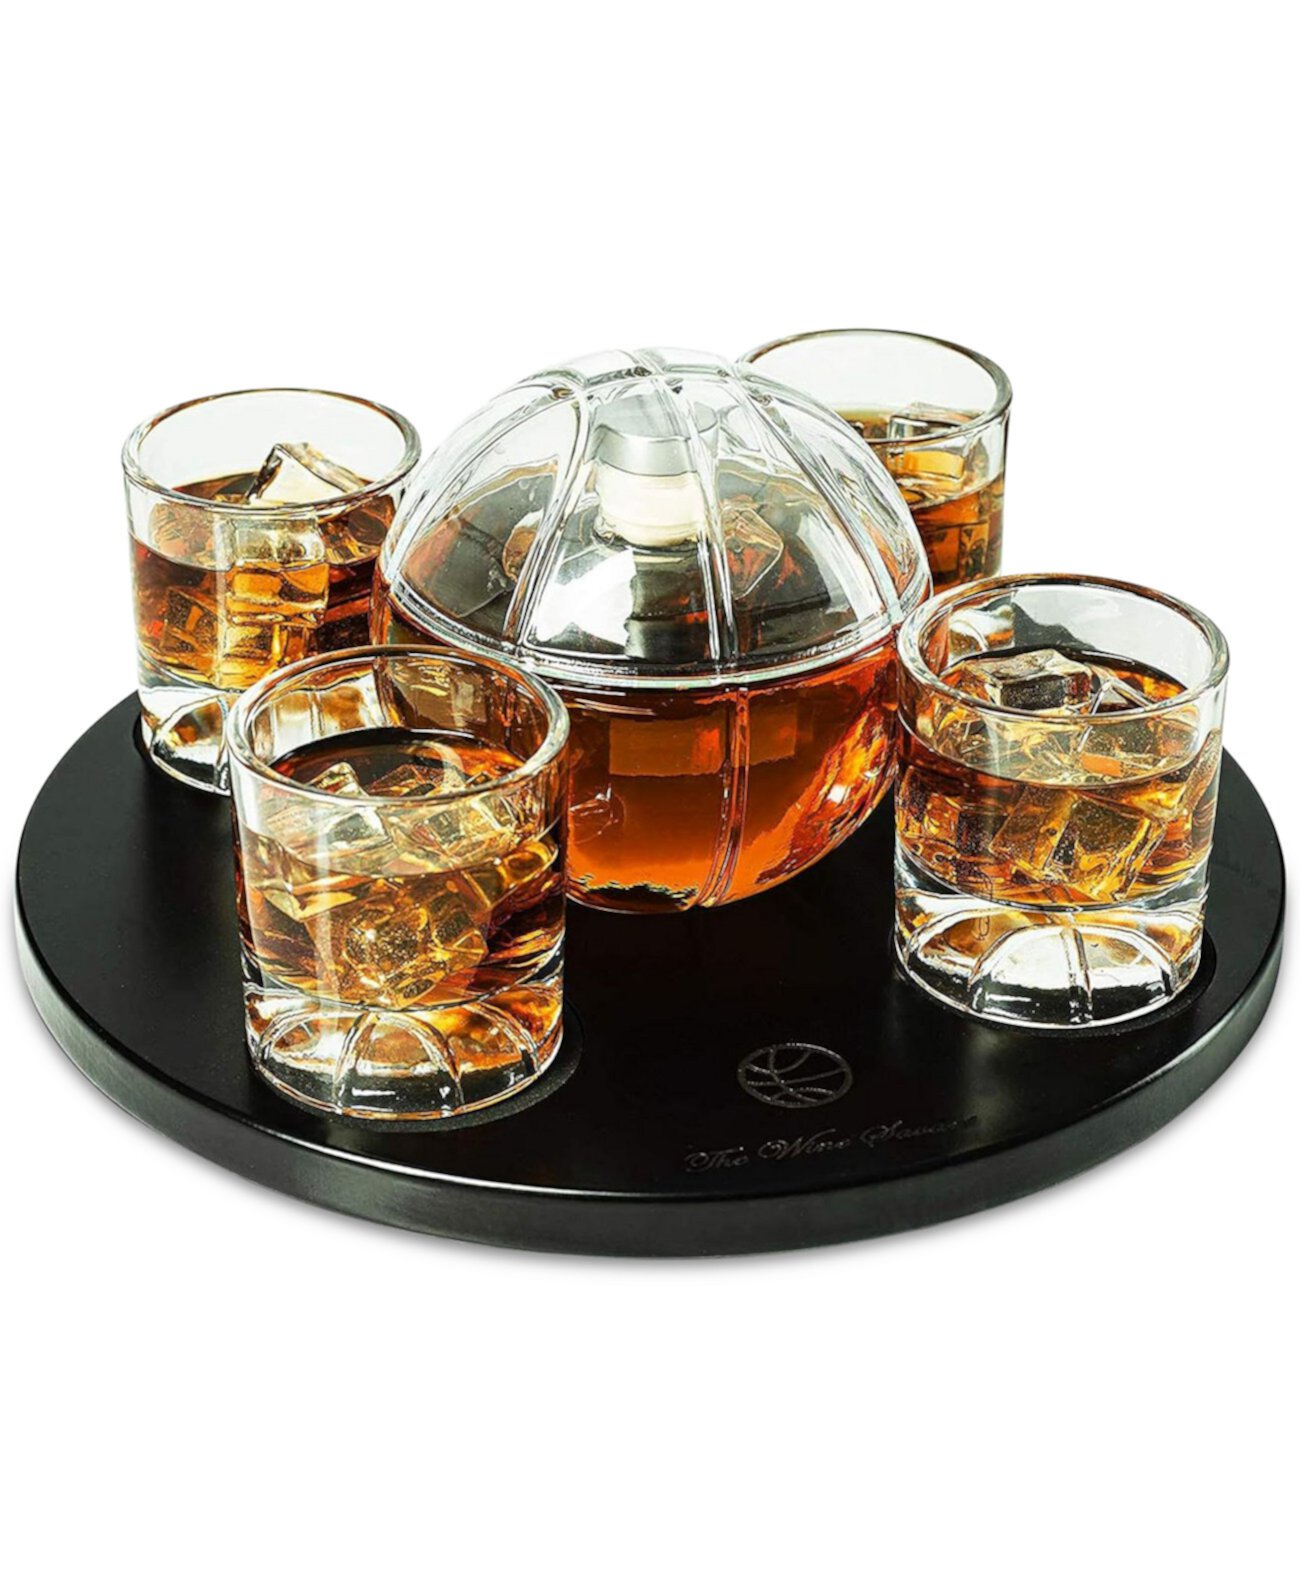 Basketball Decanter & Glass Set with Tray The Wine Savant